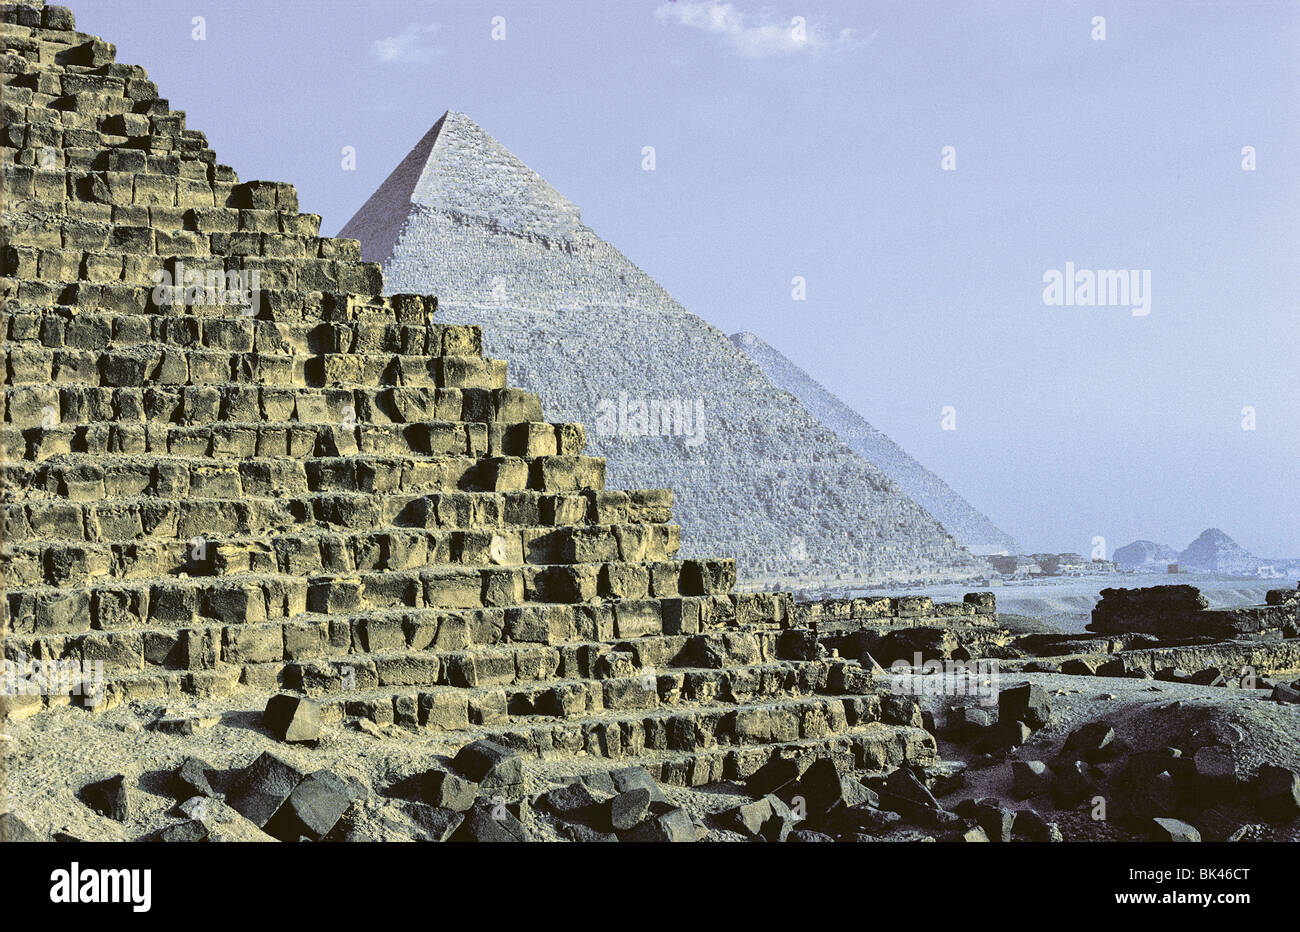 The Pyramid of Menkaure, the Pyramid of Khafre, and the Great Pyramid of Khufu in Giza, Egypt Stock Photo